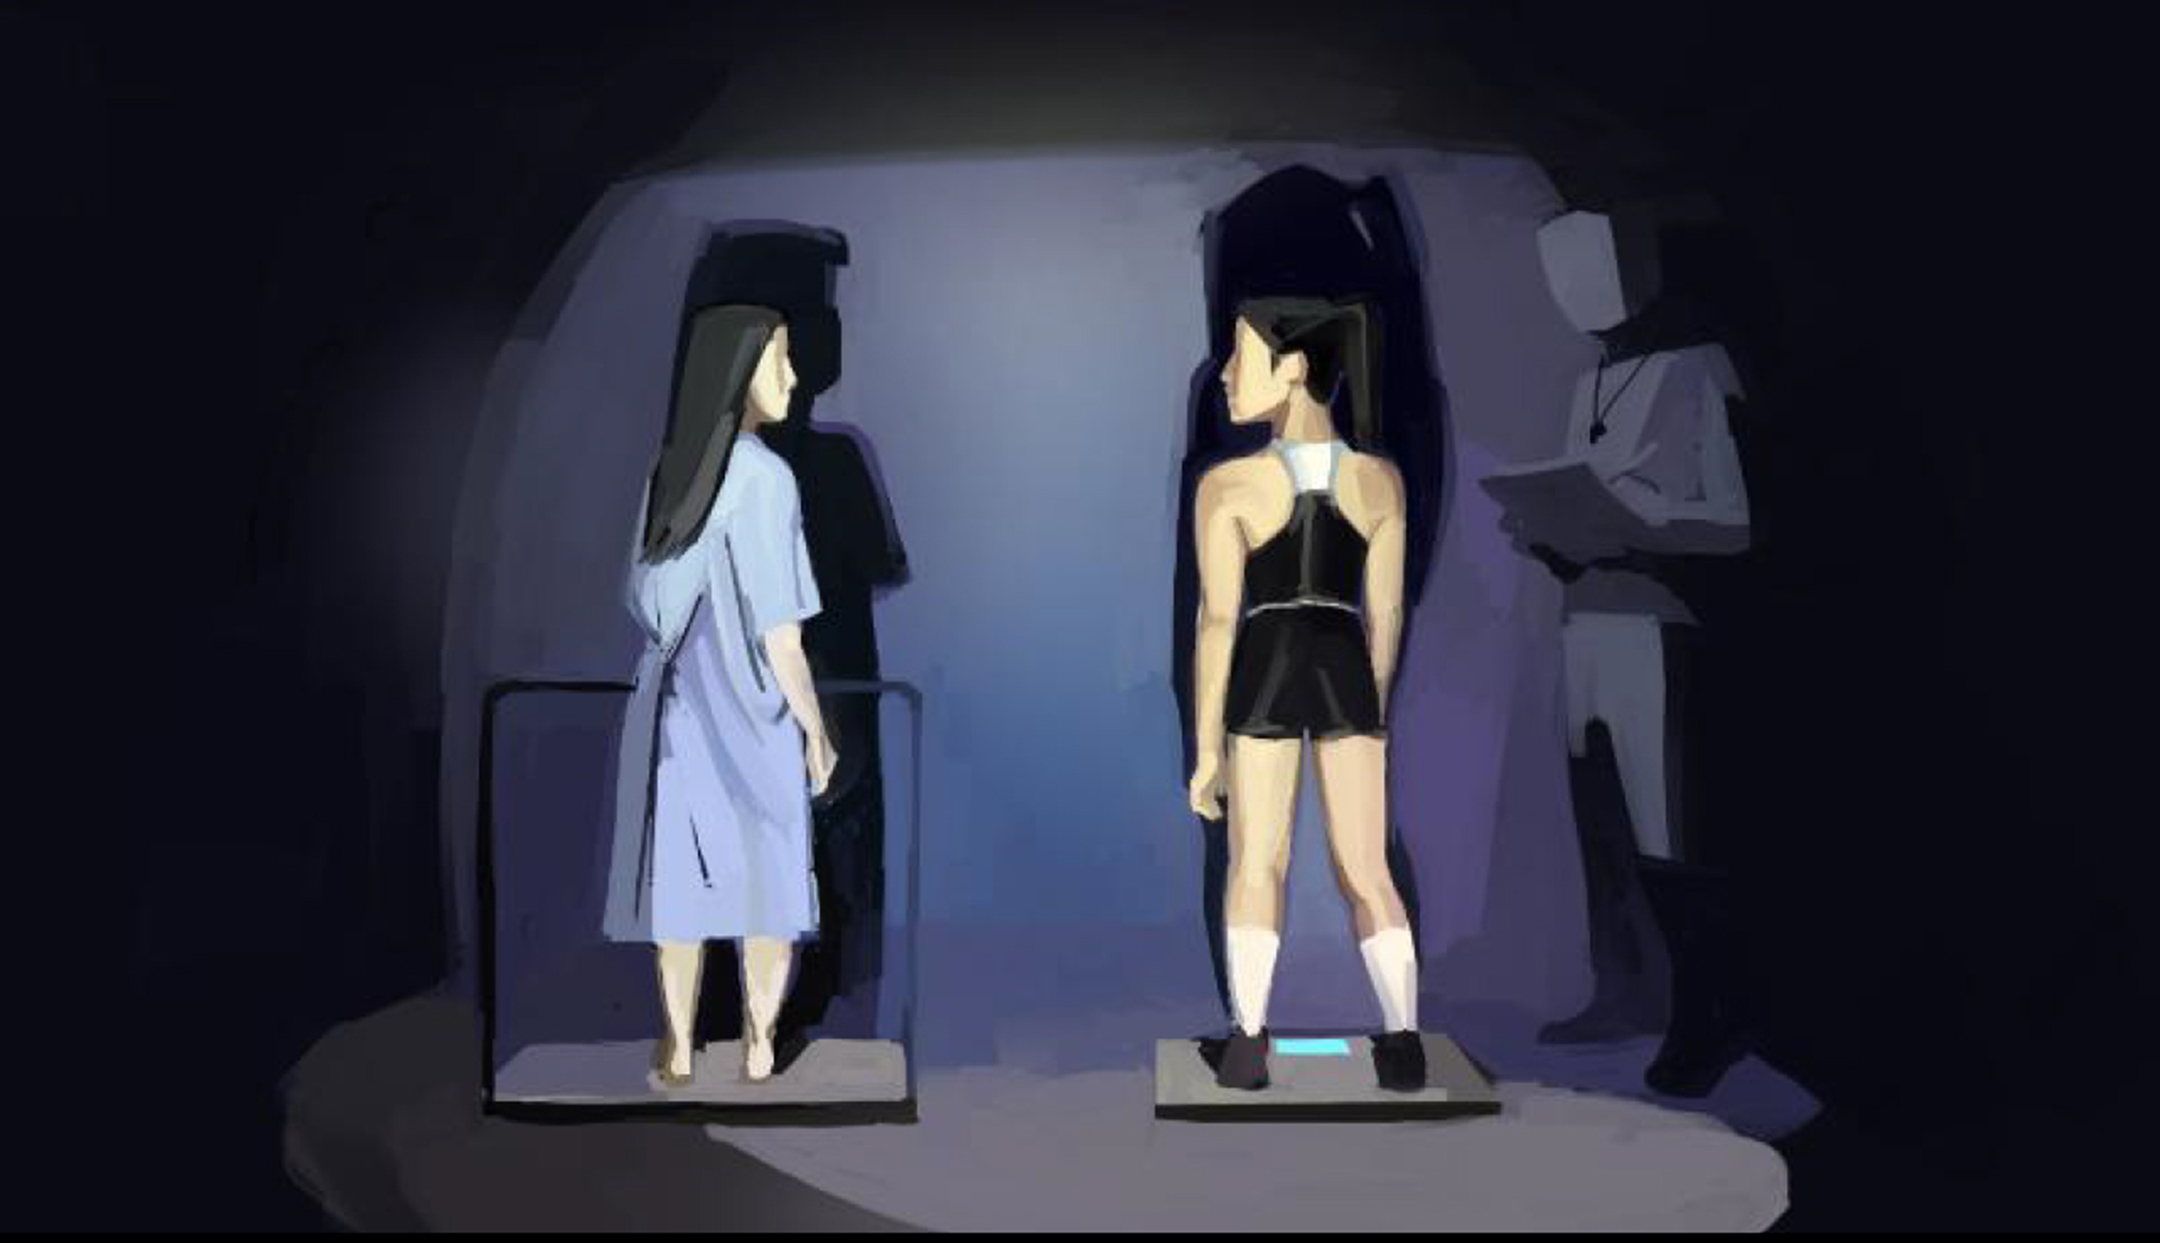 Illustration of two young women looking at each other while they stand on scales